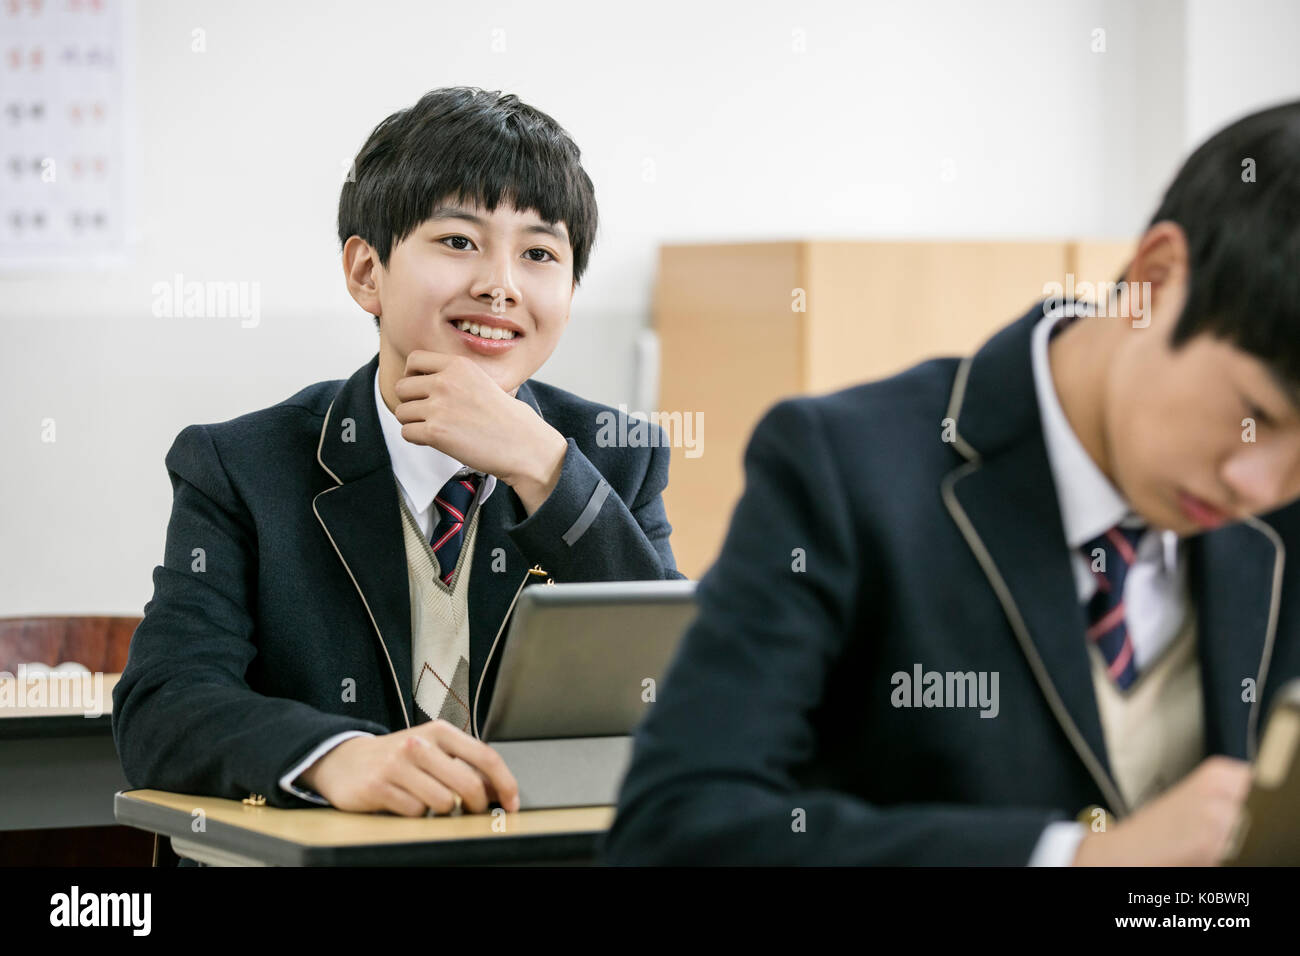 Portrait of smiling school boy with electric tablet and his classmate Stock Photo